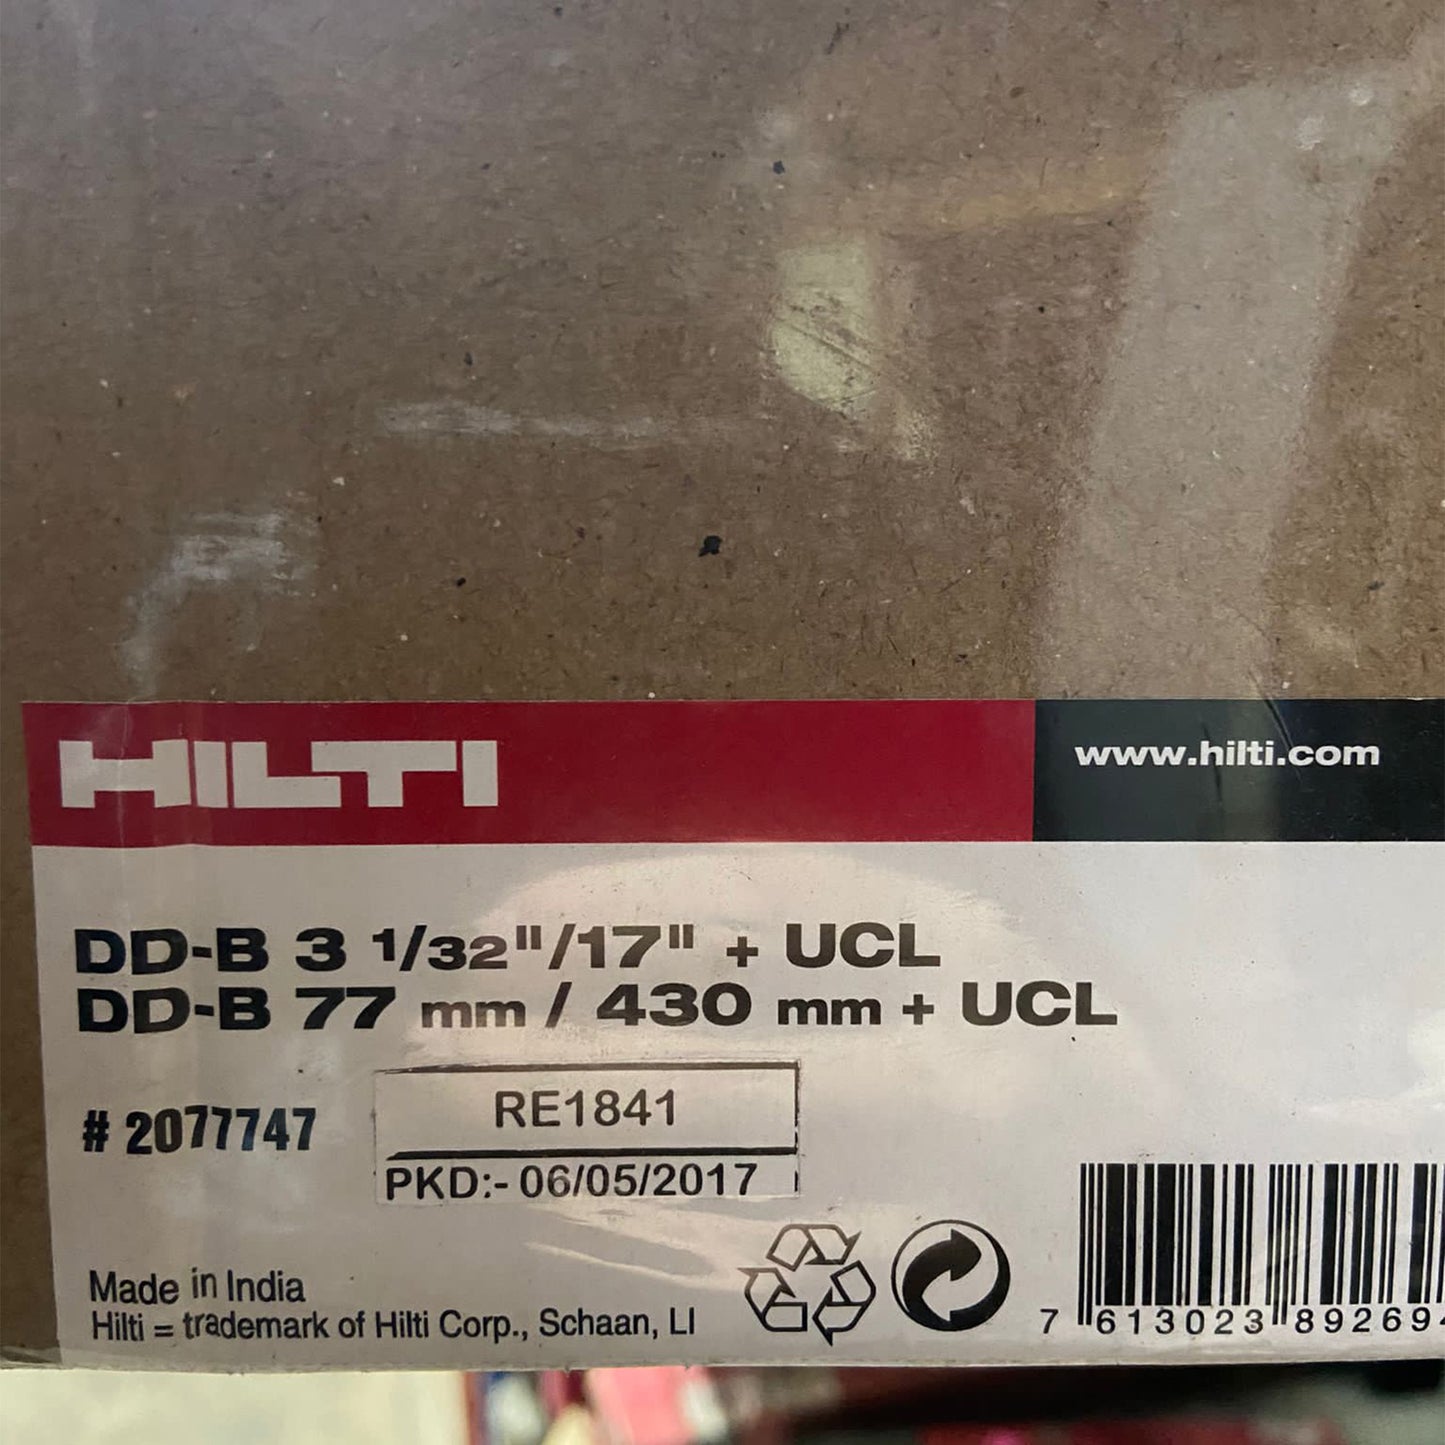 DD-B 3 1/32" to 17" Diamond Drill Bit Set with UCL - 77mm to 430mm - 2077747